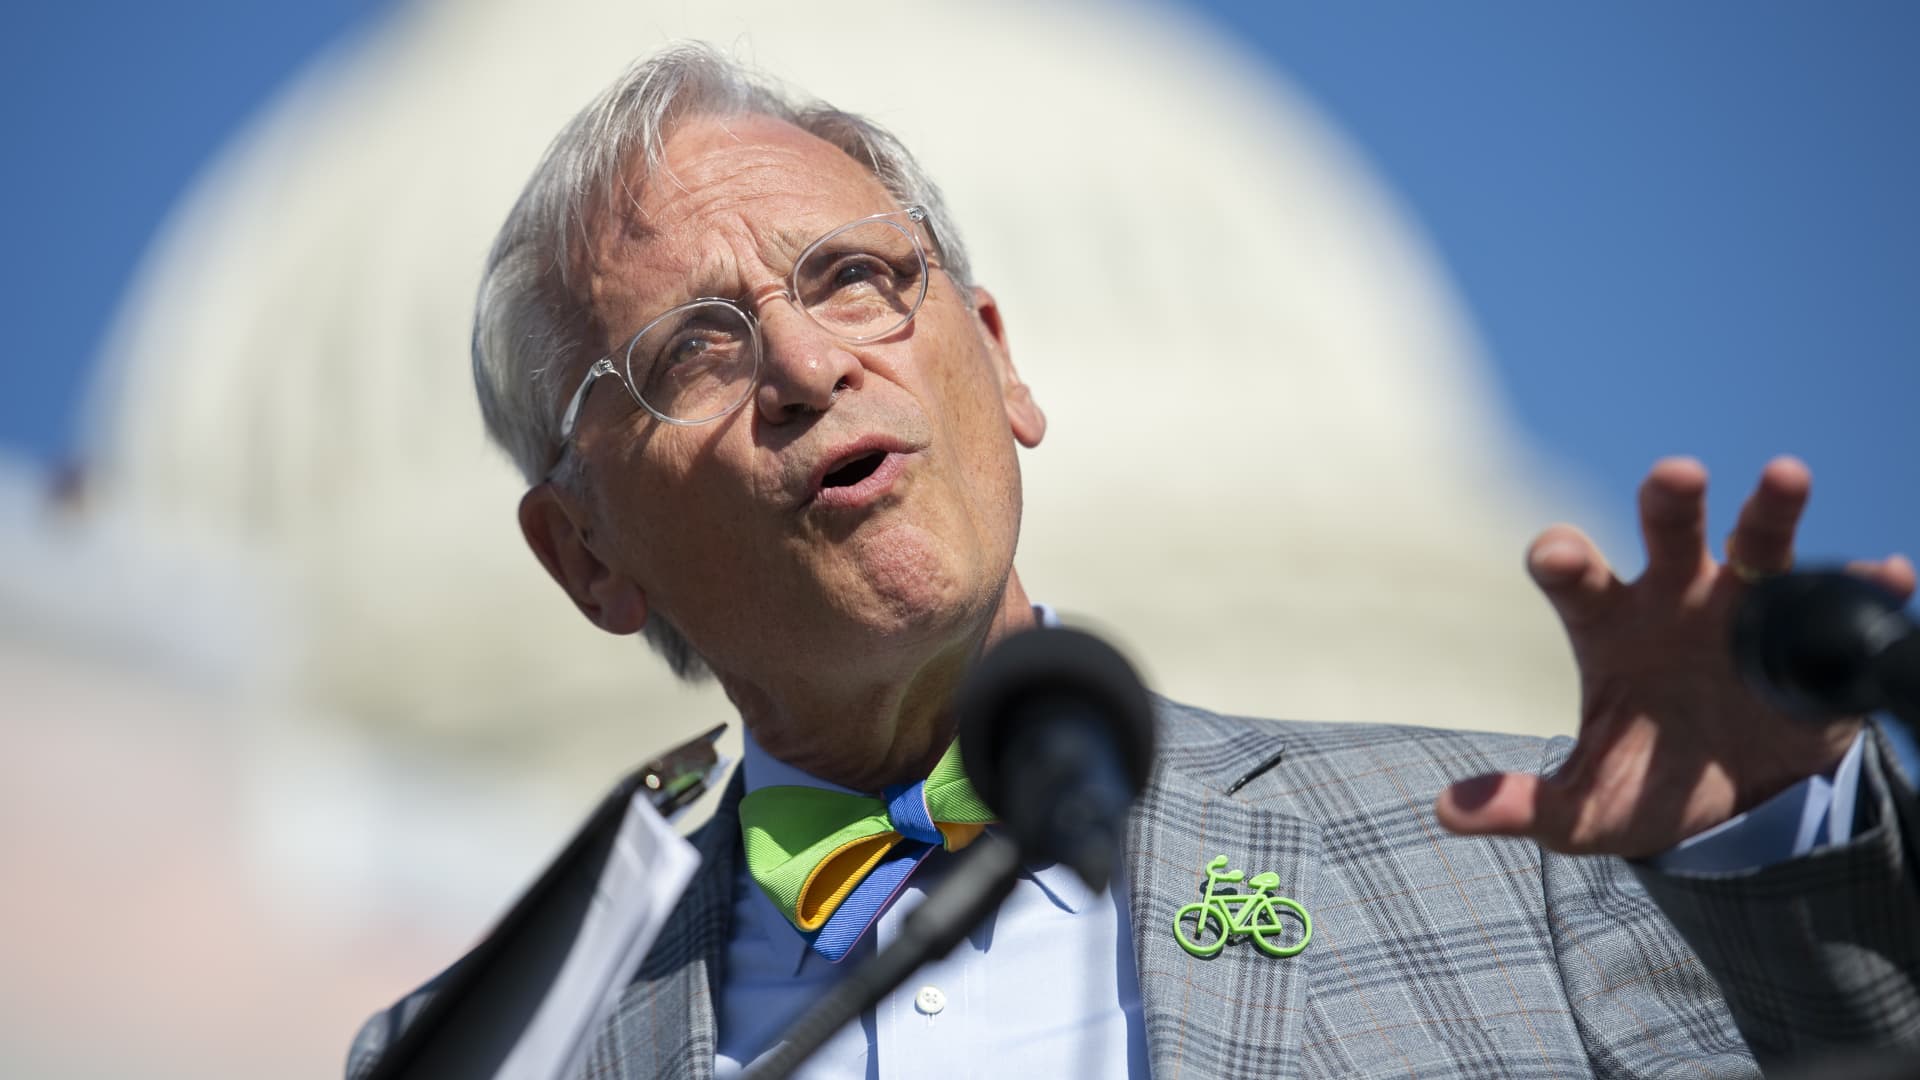 Rep. Earl Blumenauer, D-Ore., speaks during a news conference with ranchers supporting the Green New Deal and farm policy reform in Washington on Wednesday September 18, 2019.